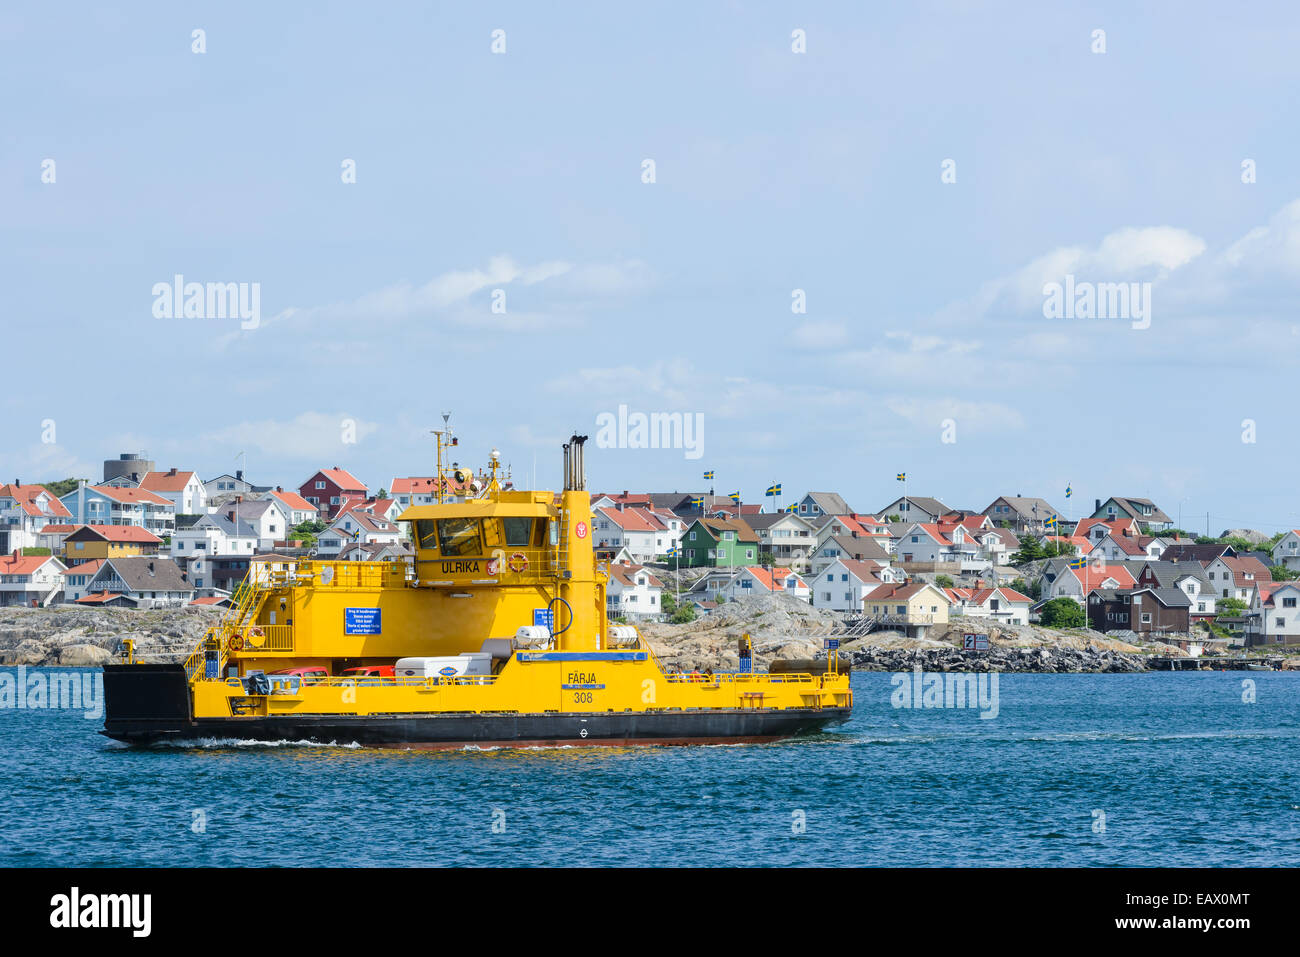 Car ferry passing by houses on the shore Stock Photo